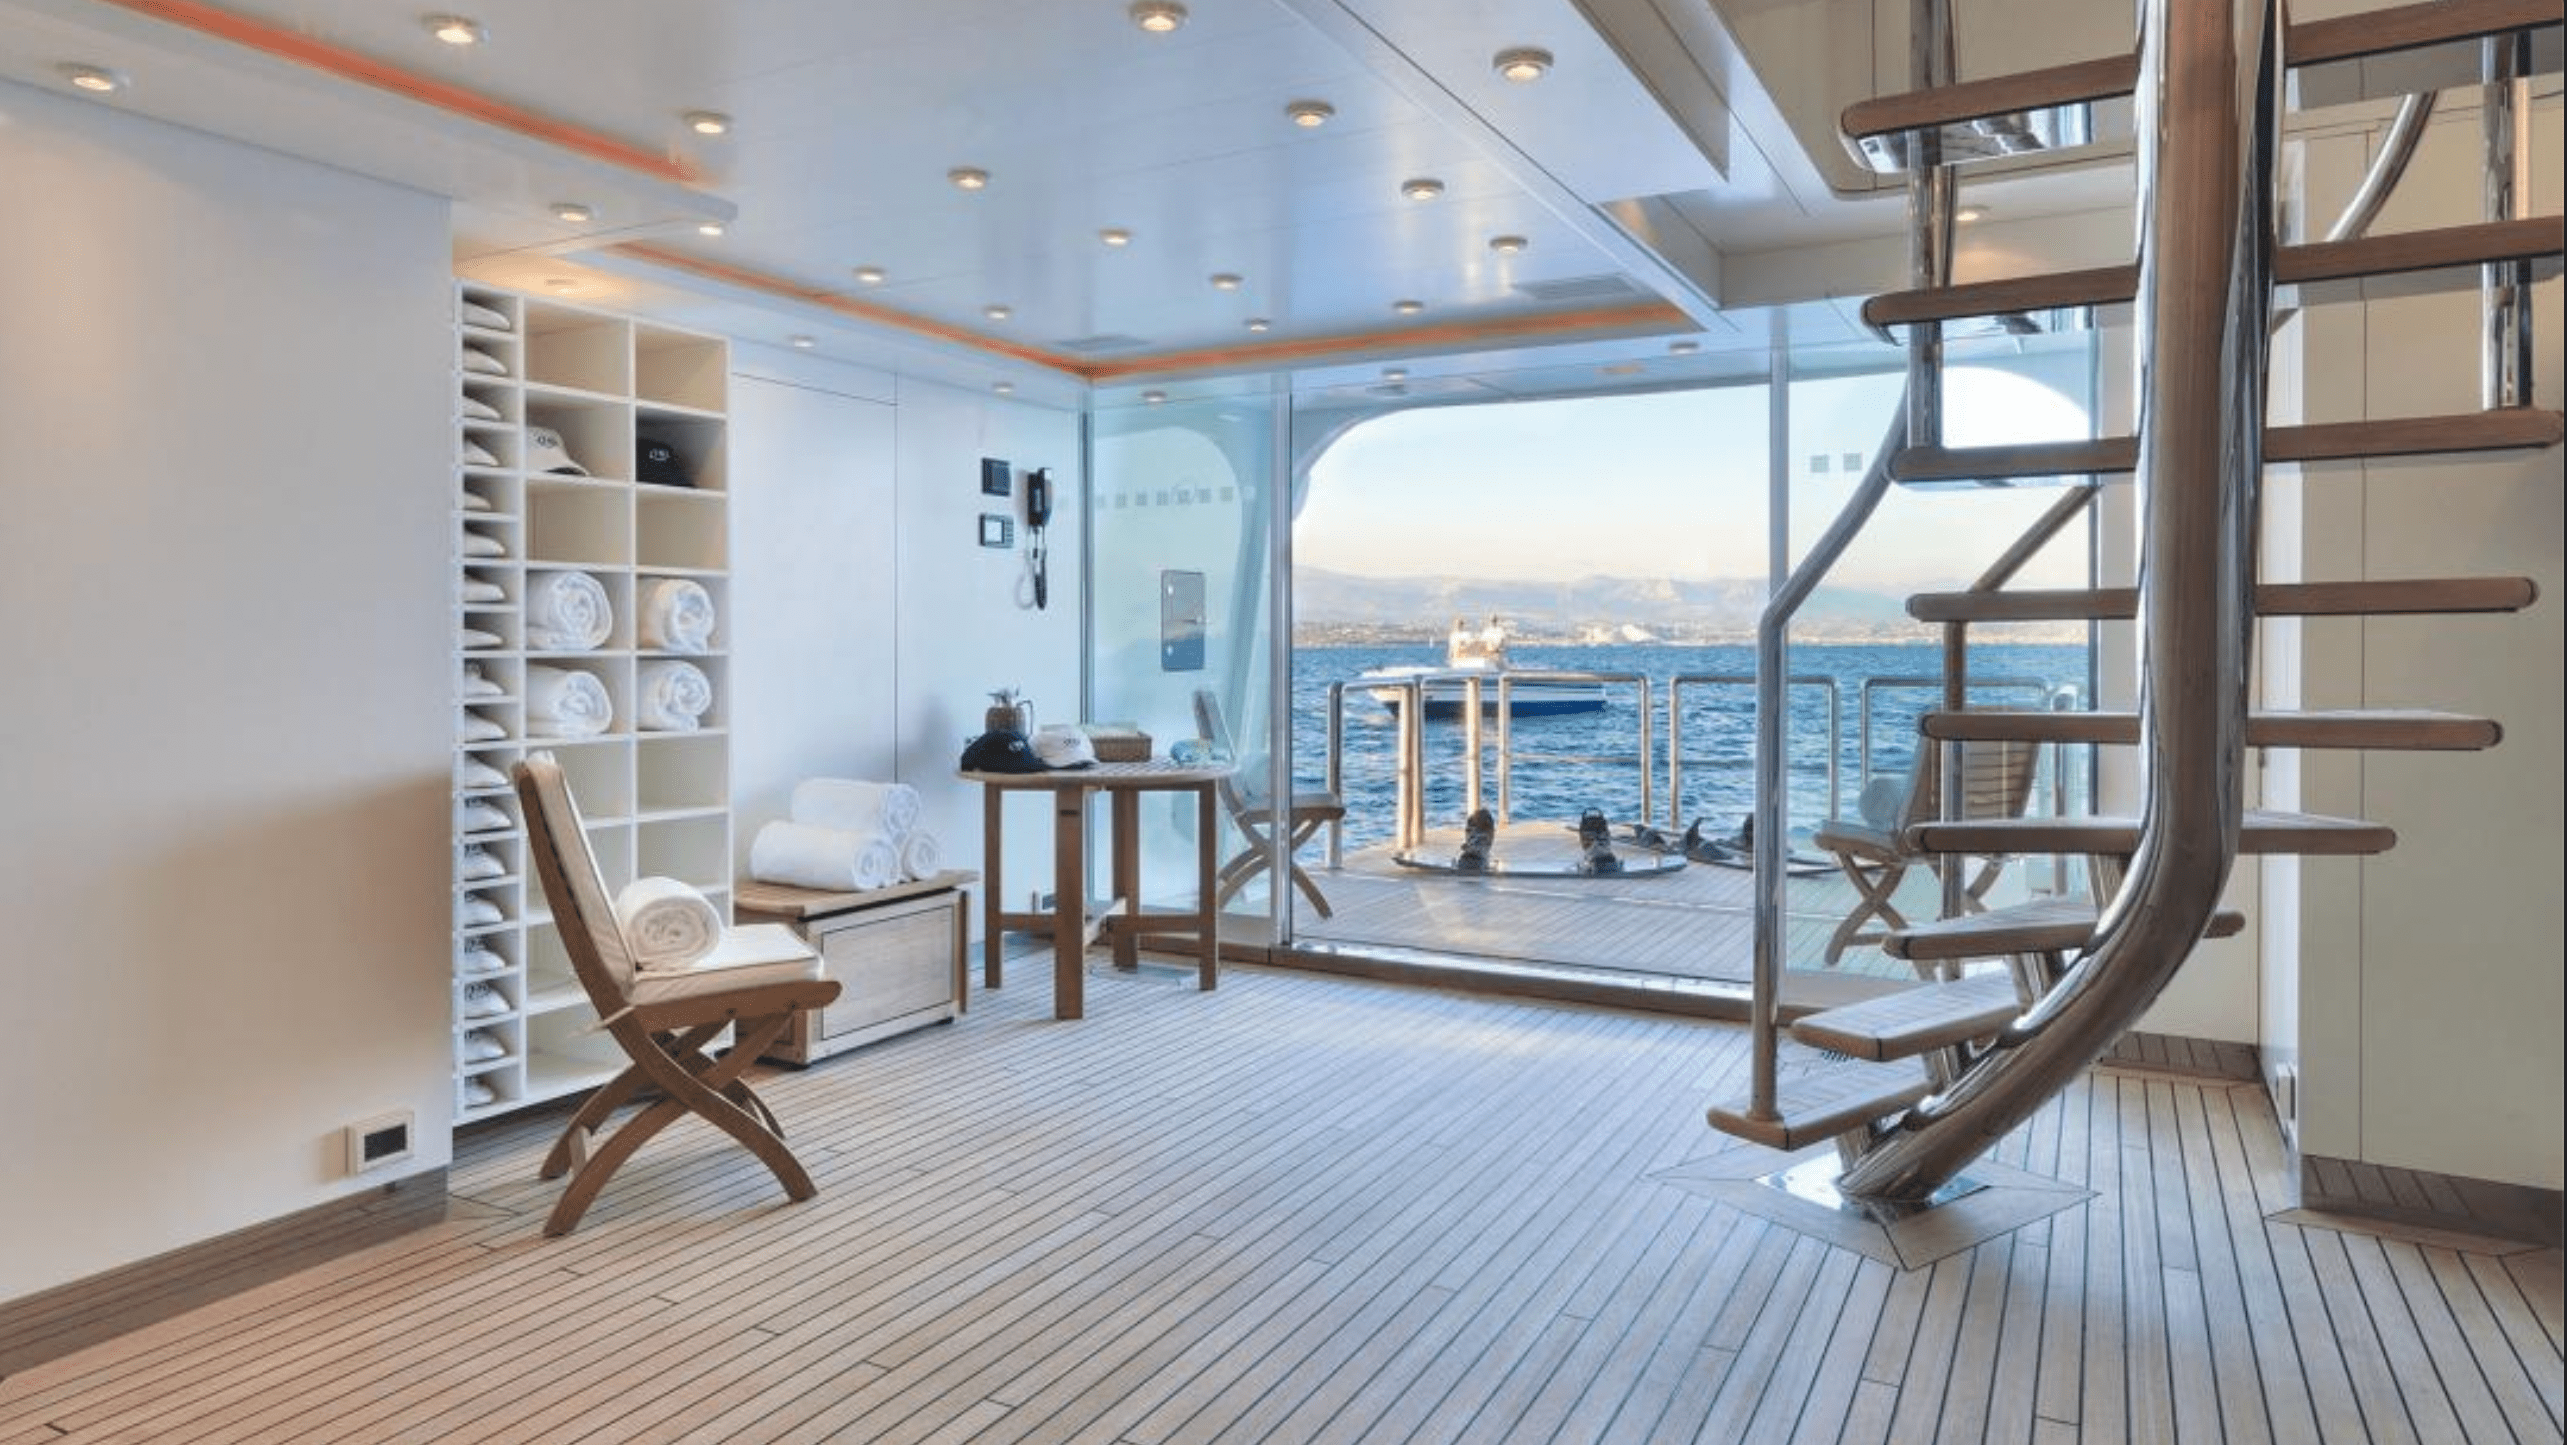 Step Inside $600 Million Superyacht owned by Russian Billionaire